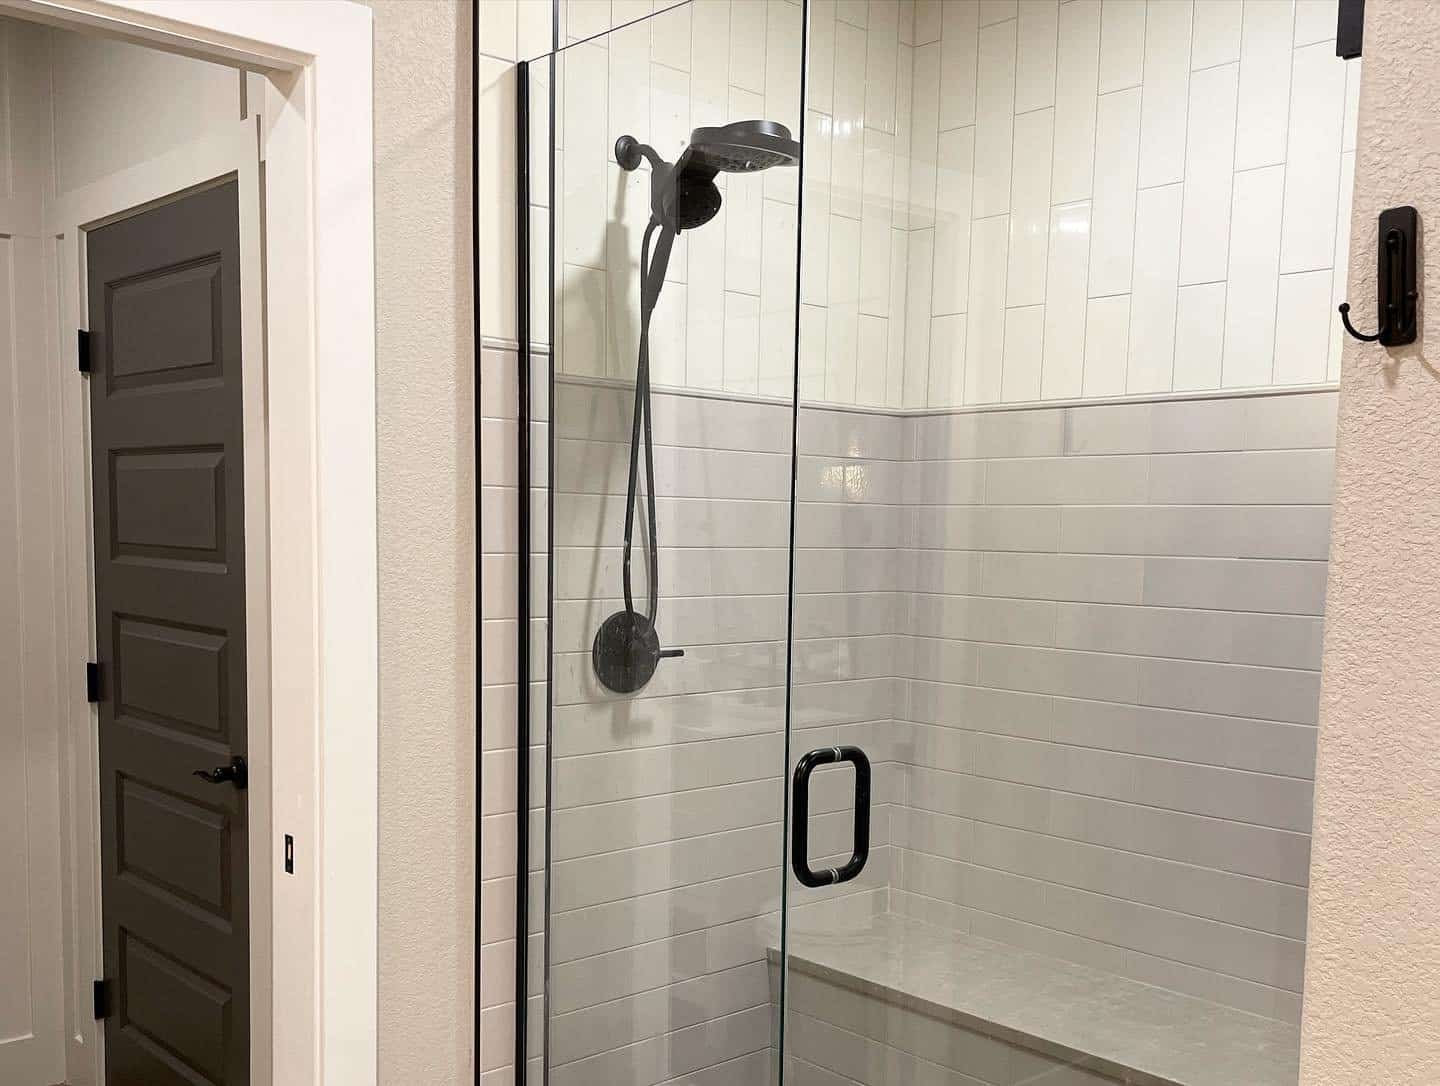 Walk-in shower with black shower head and white and gray tiles